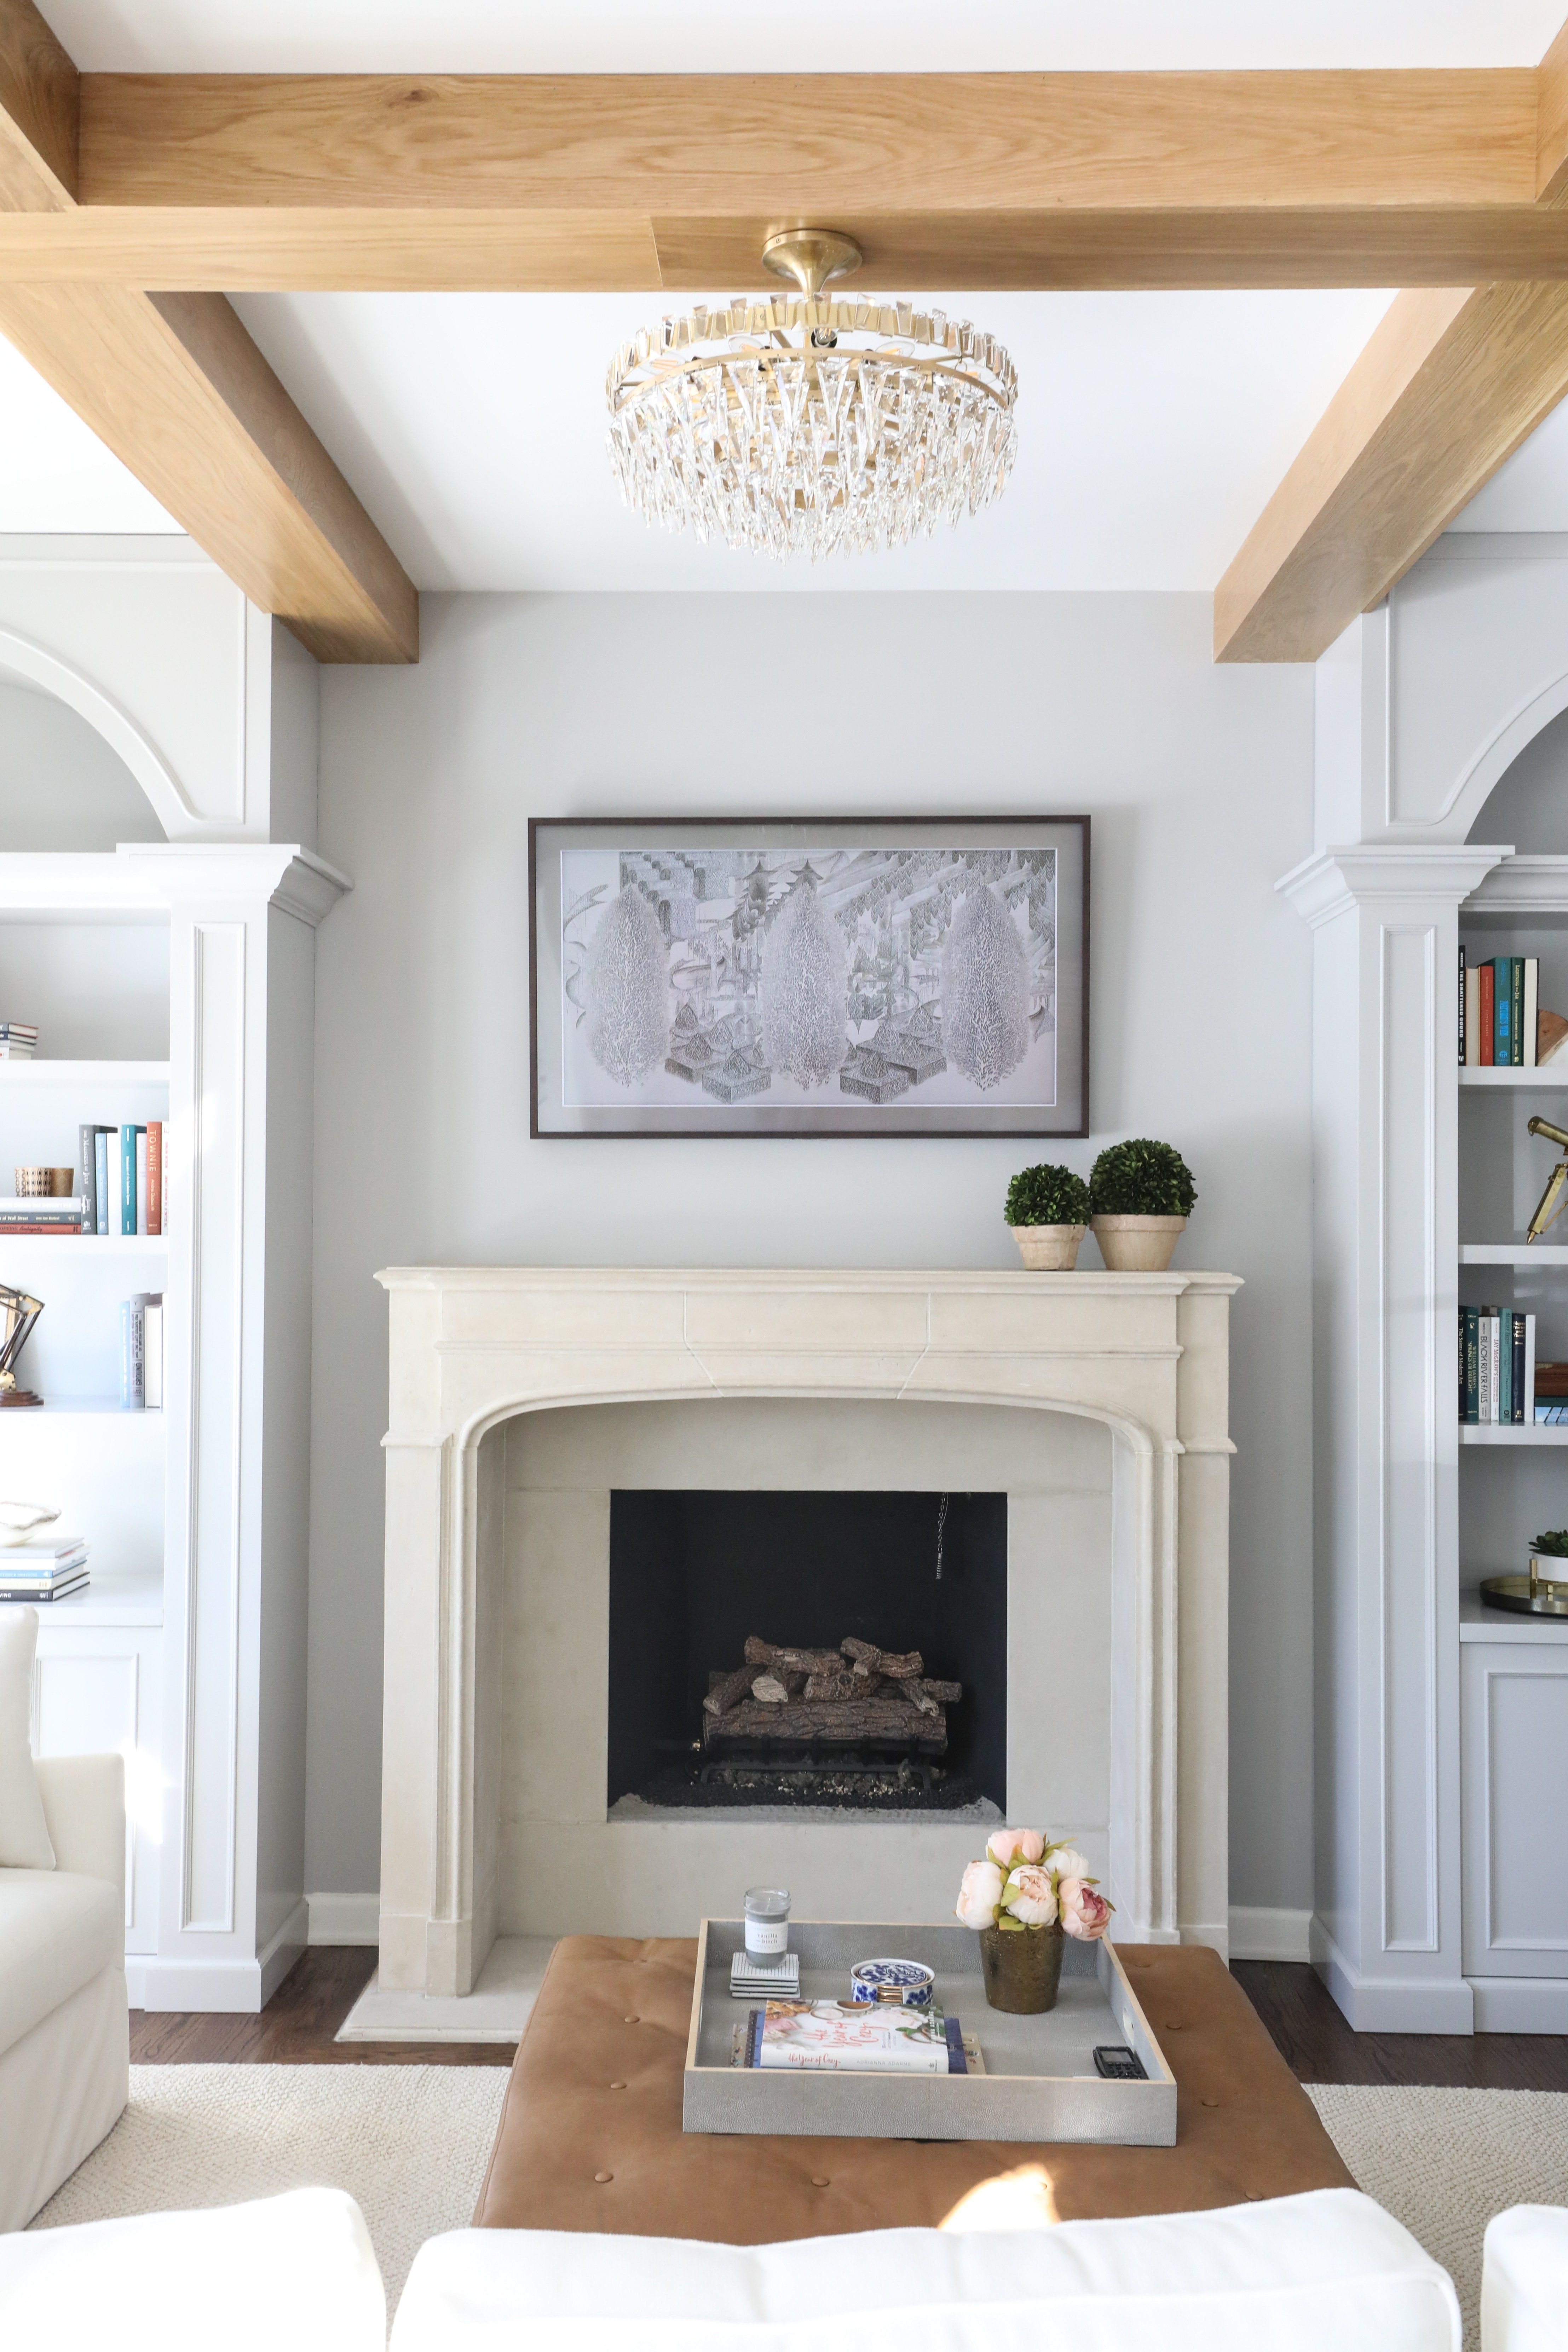 Fireplaces and More Inspirational Arched Built Ins Park & Oak Design